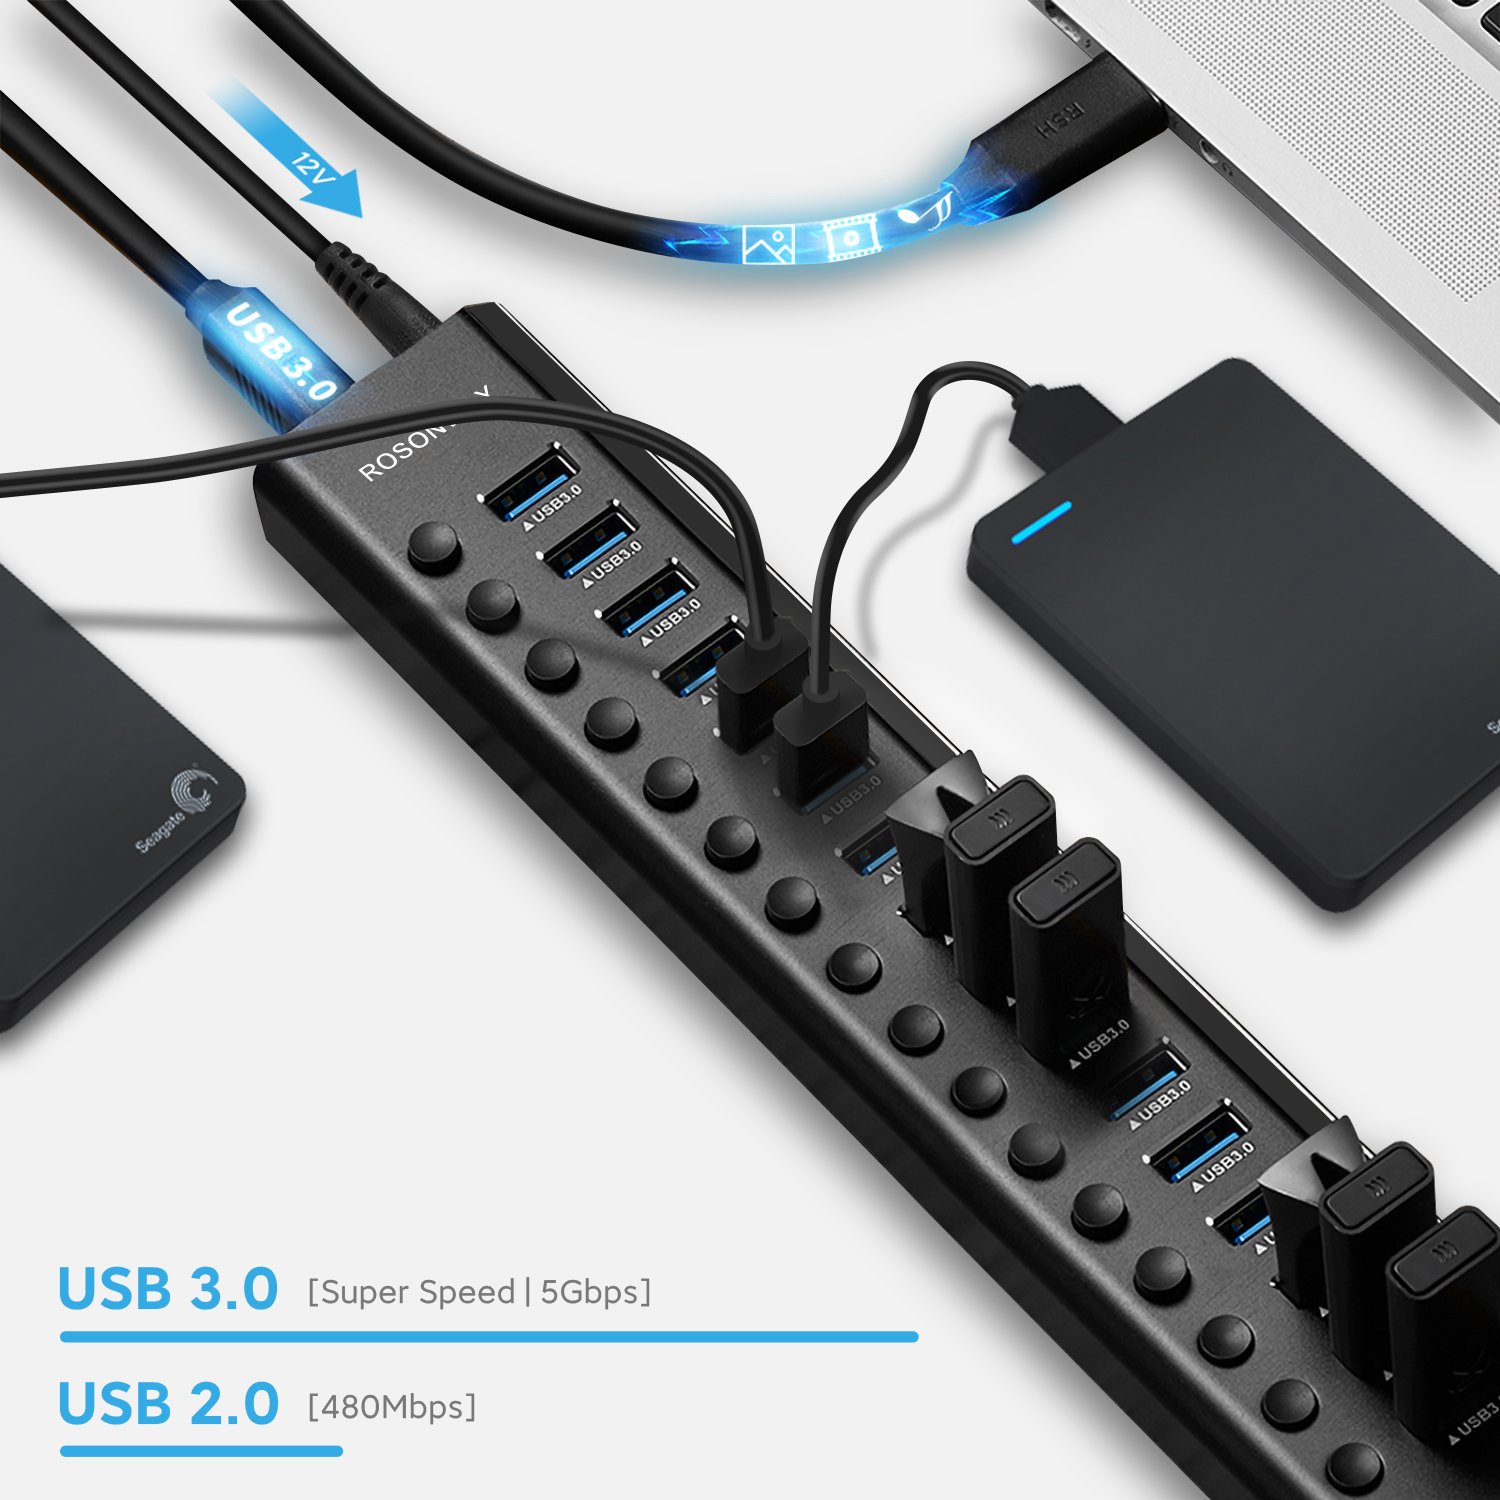 Rosonway USB Hub 3.0 Powered Aluminum 7 Ports USB 3.0 Data Hub Splitter  with 24W (12V/2A) Power Adapter and Individual On/Off Switches USB Port